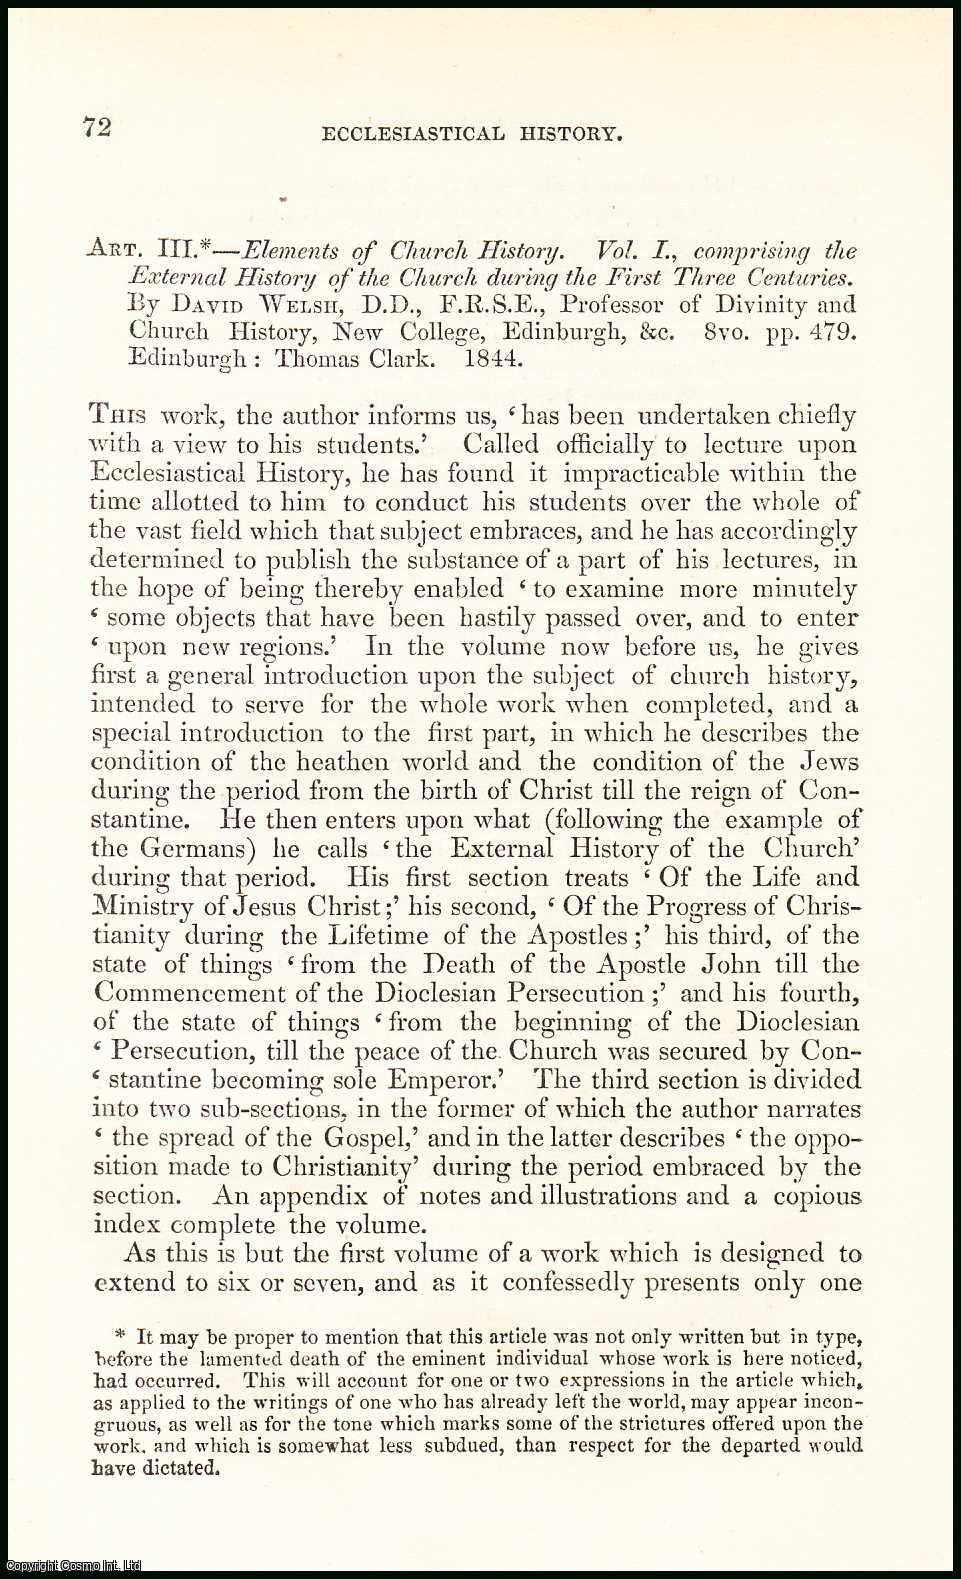 J. R. Beard - Ecclesiastical History. A rare original article from the British Quarterly Review, 1845.